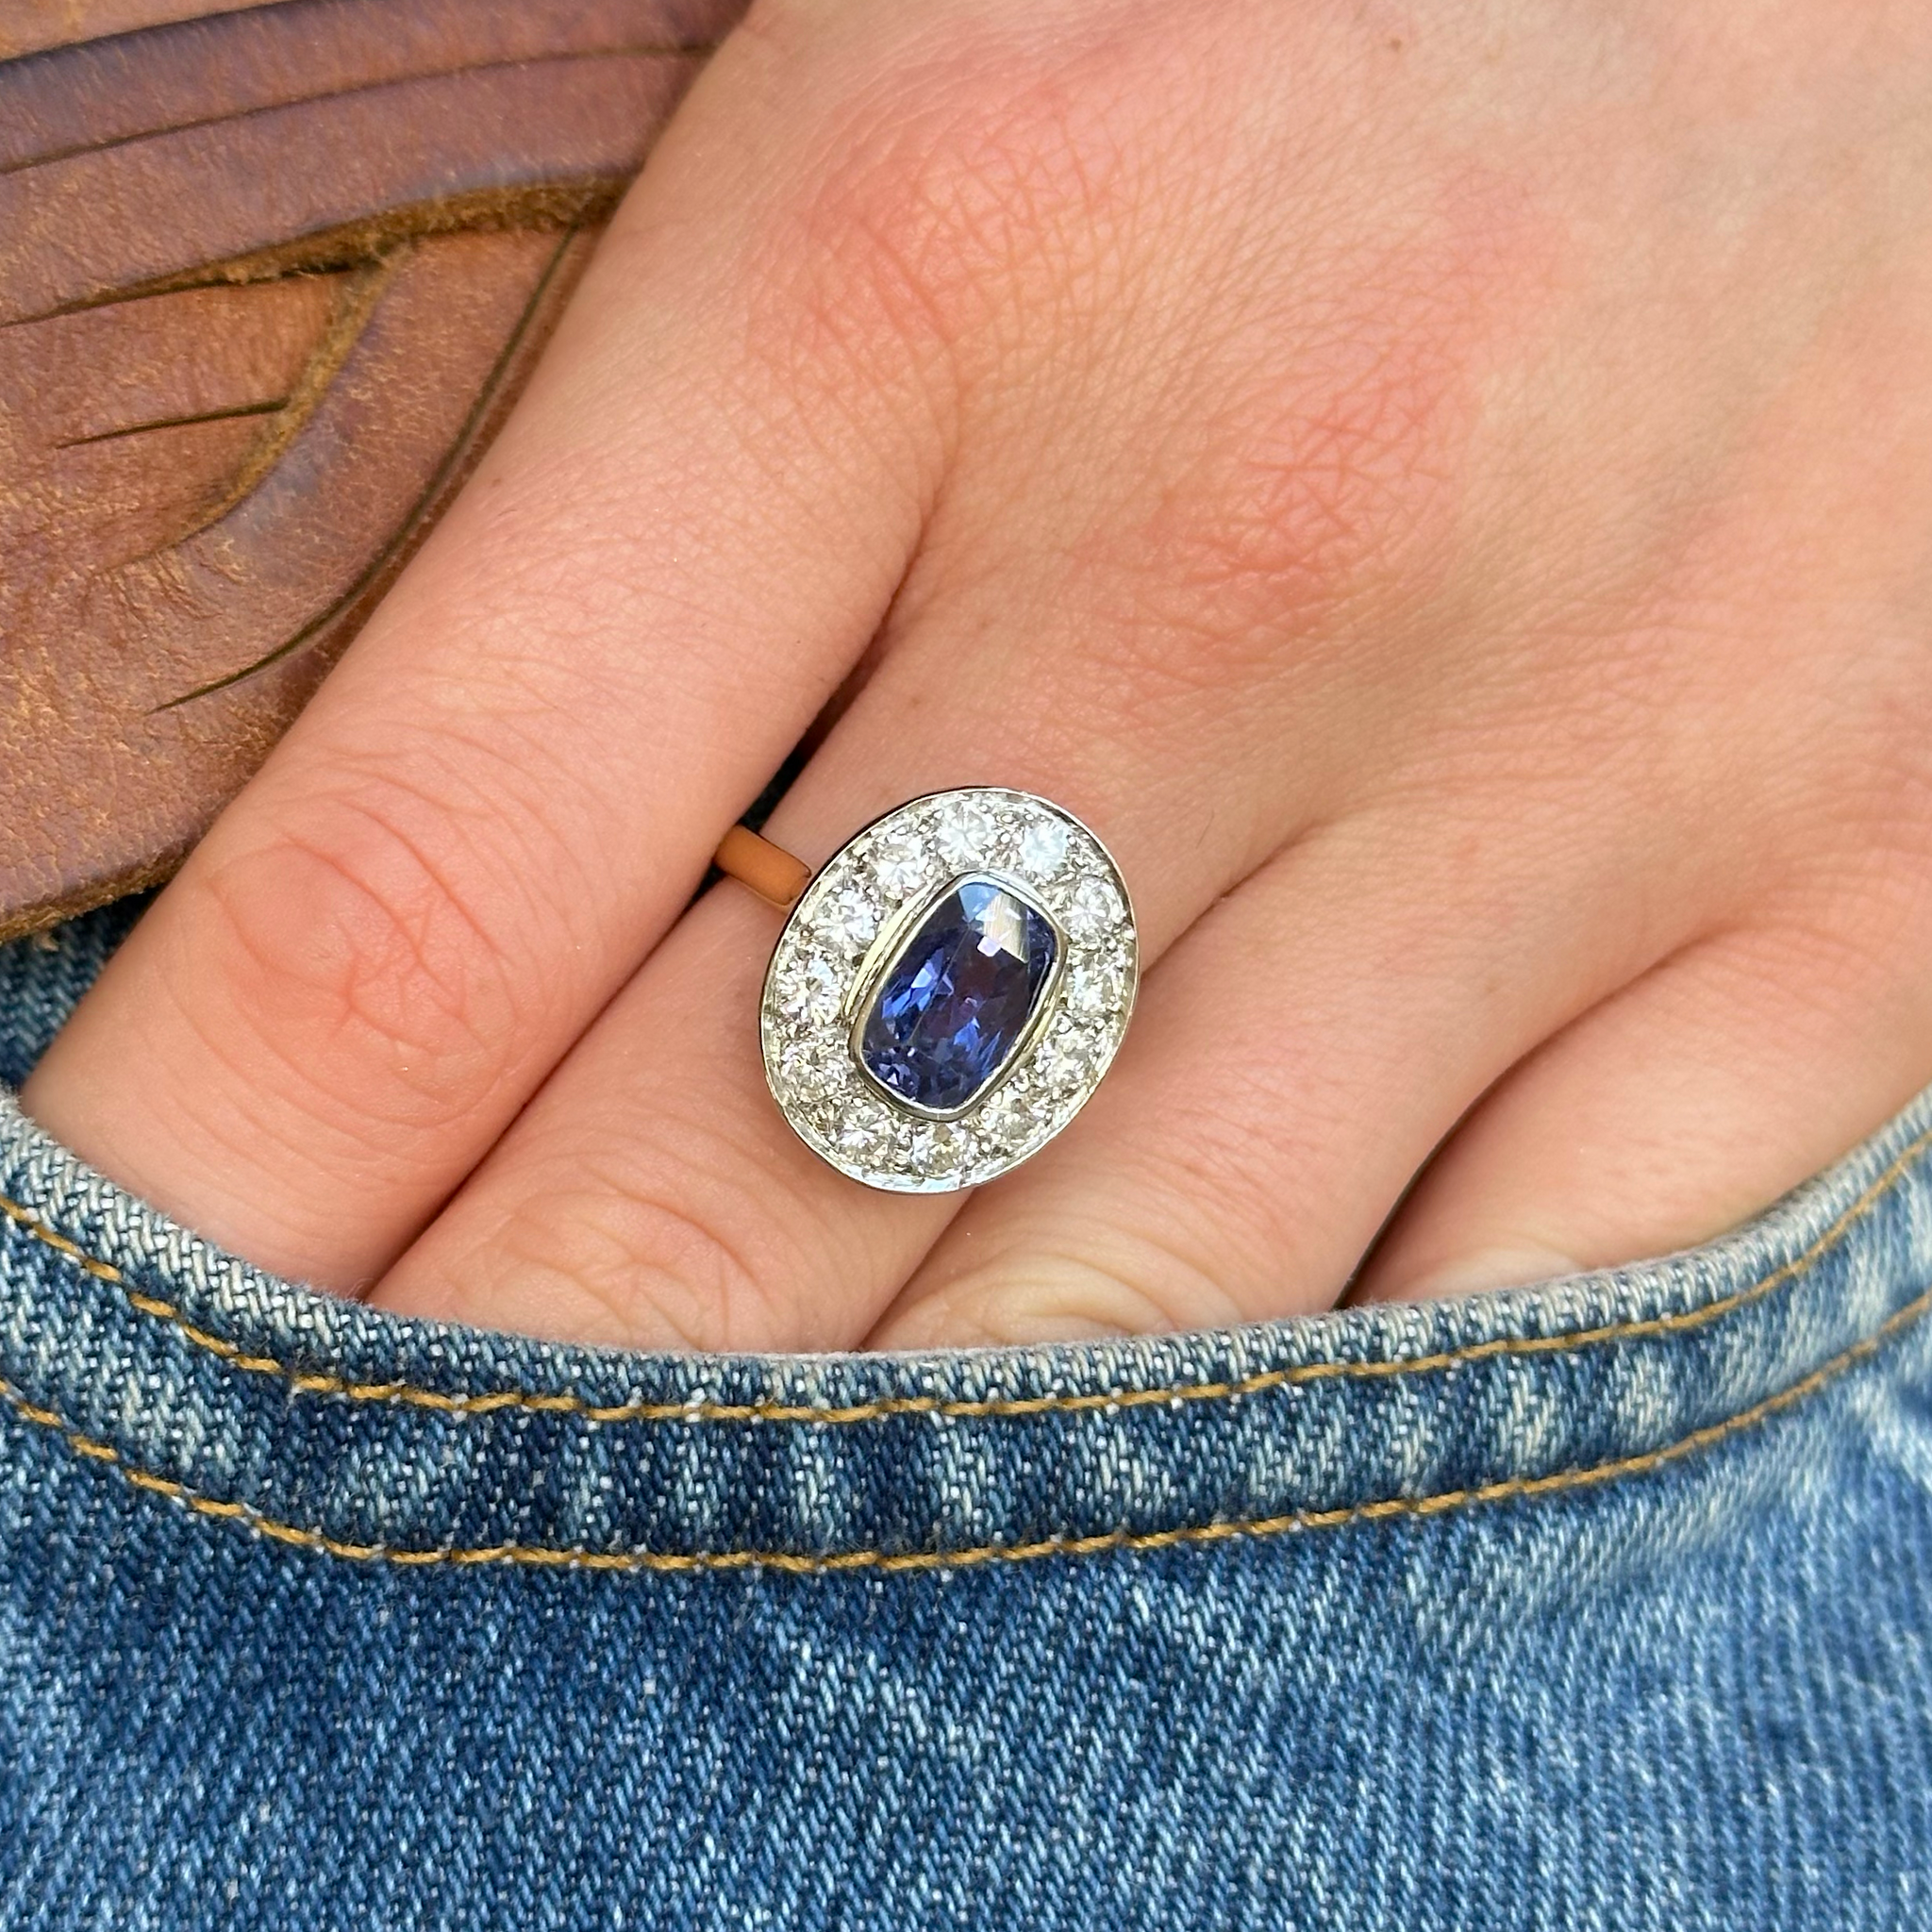 Vintage, 1980s Sapphire & Diamond Ring, 18ct Yellow Gold & Platinum worn on hand in pocket of jeans